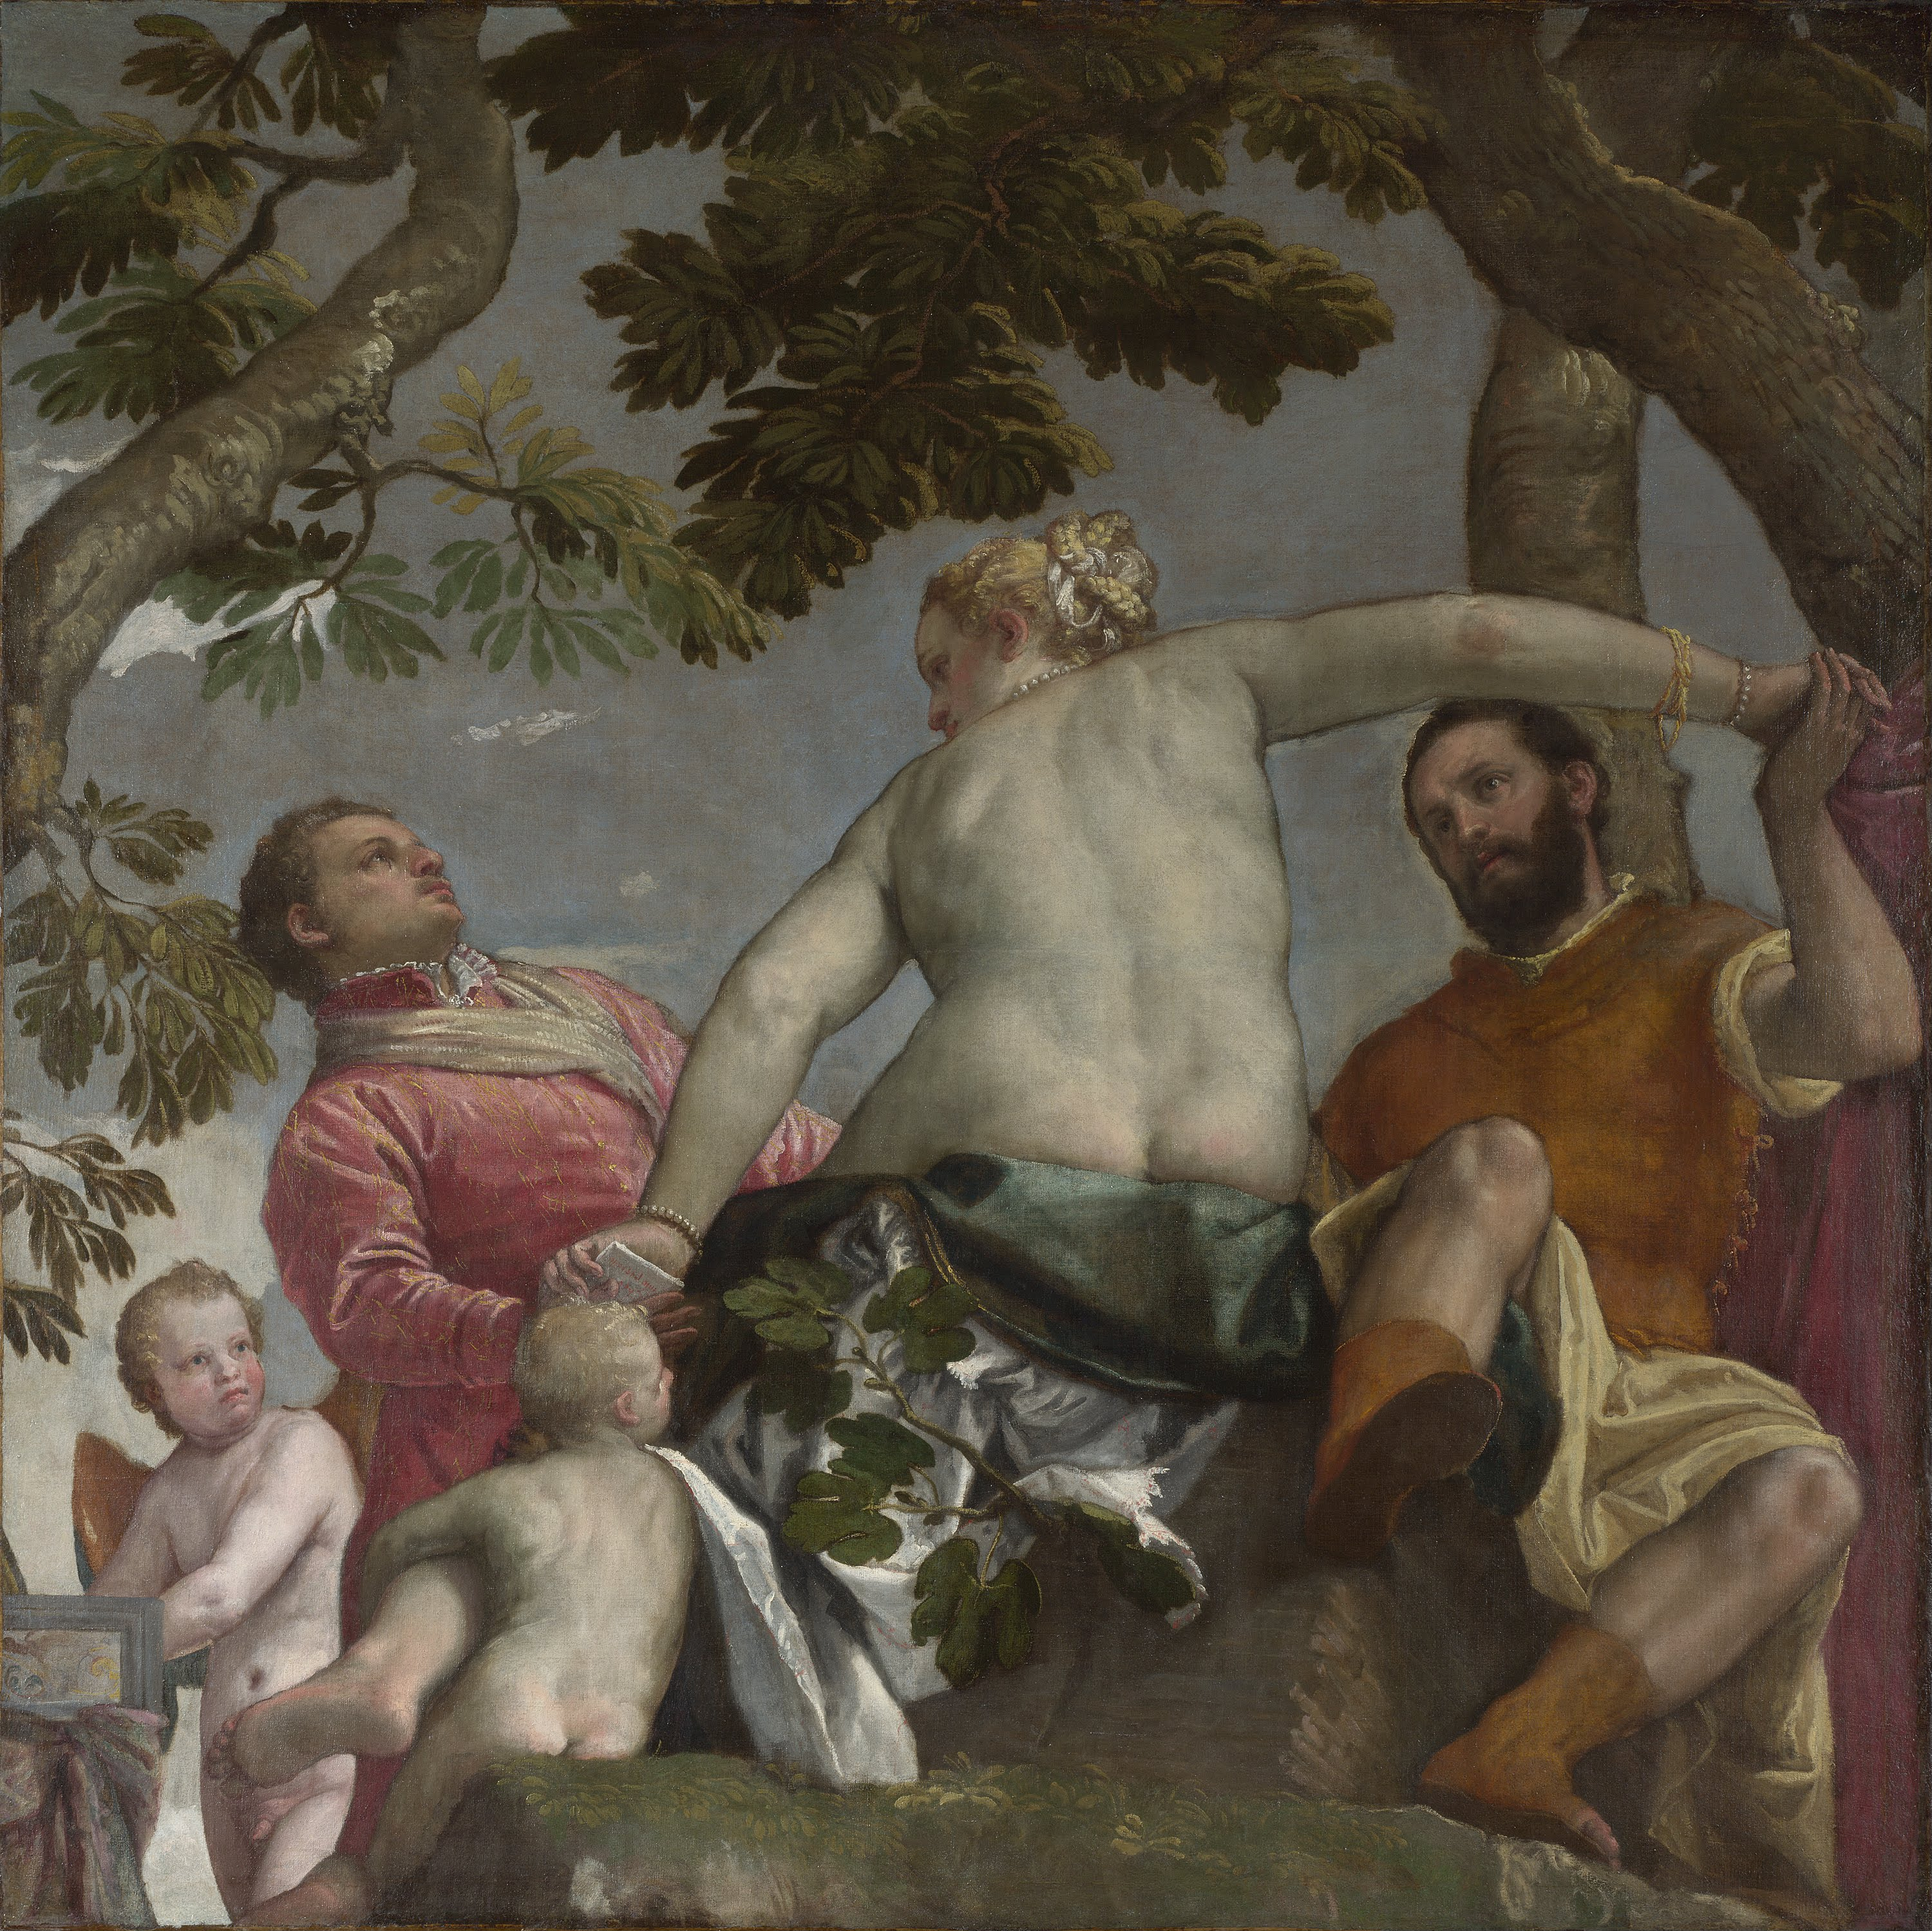 Unfaithfulness by Paolo Veronese - 1575 - 189.9 x 189.9 cm National Gallery